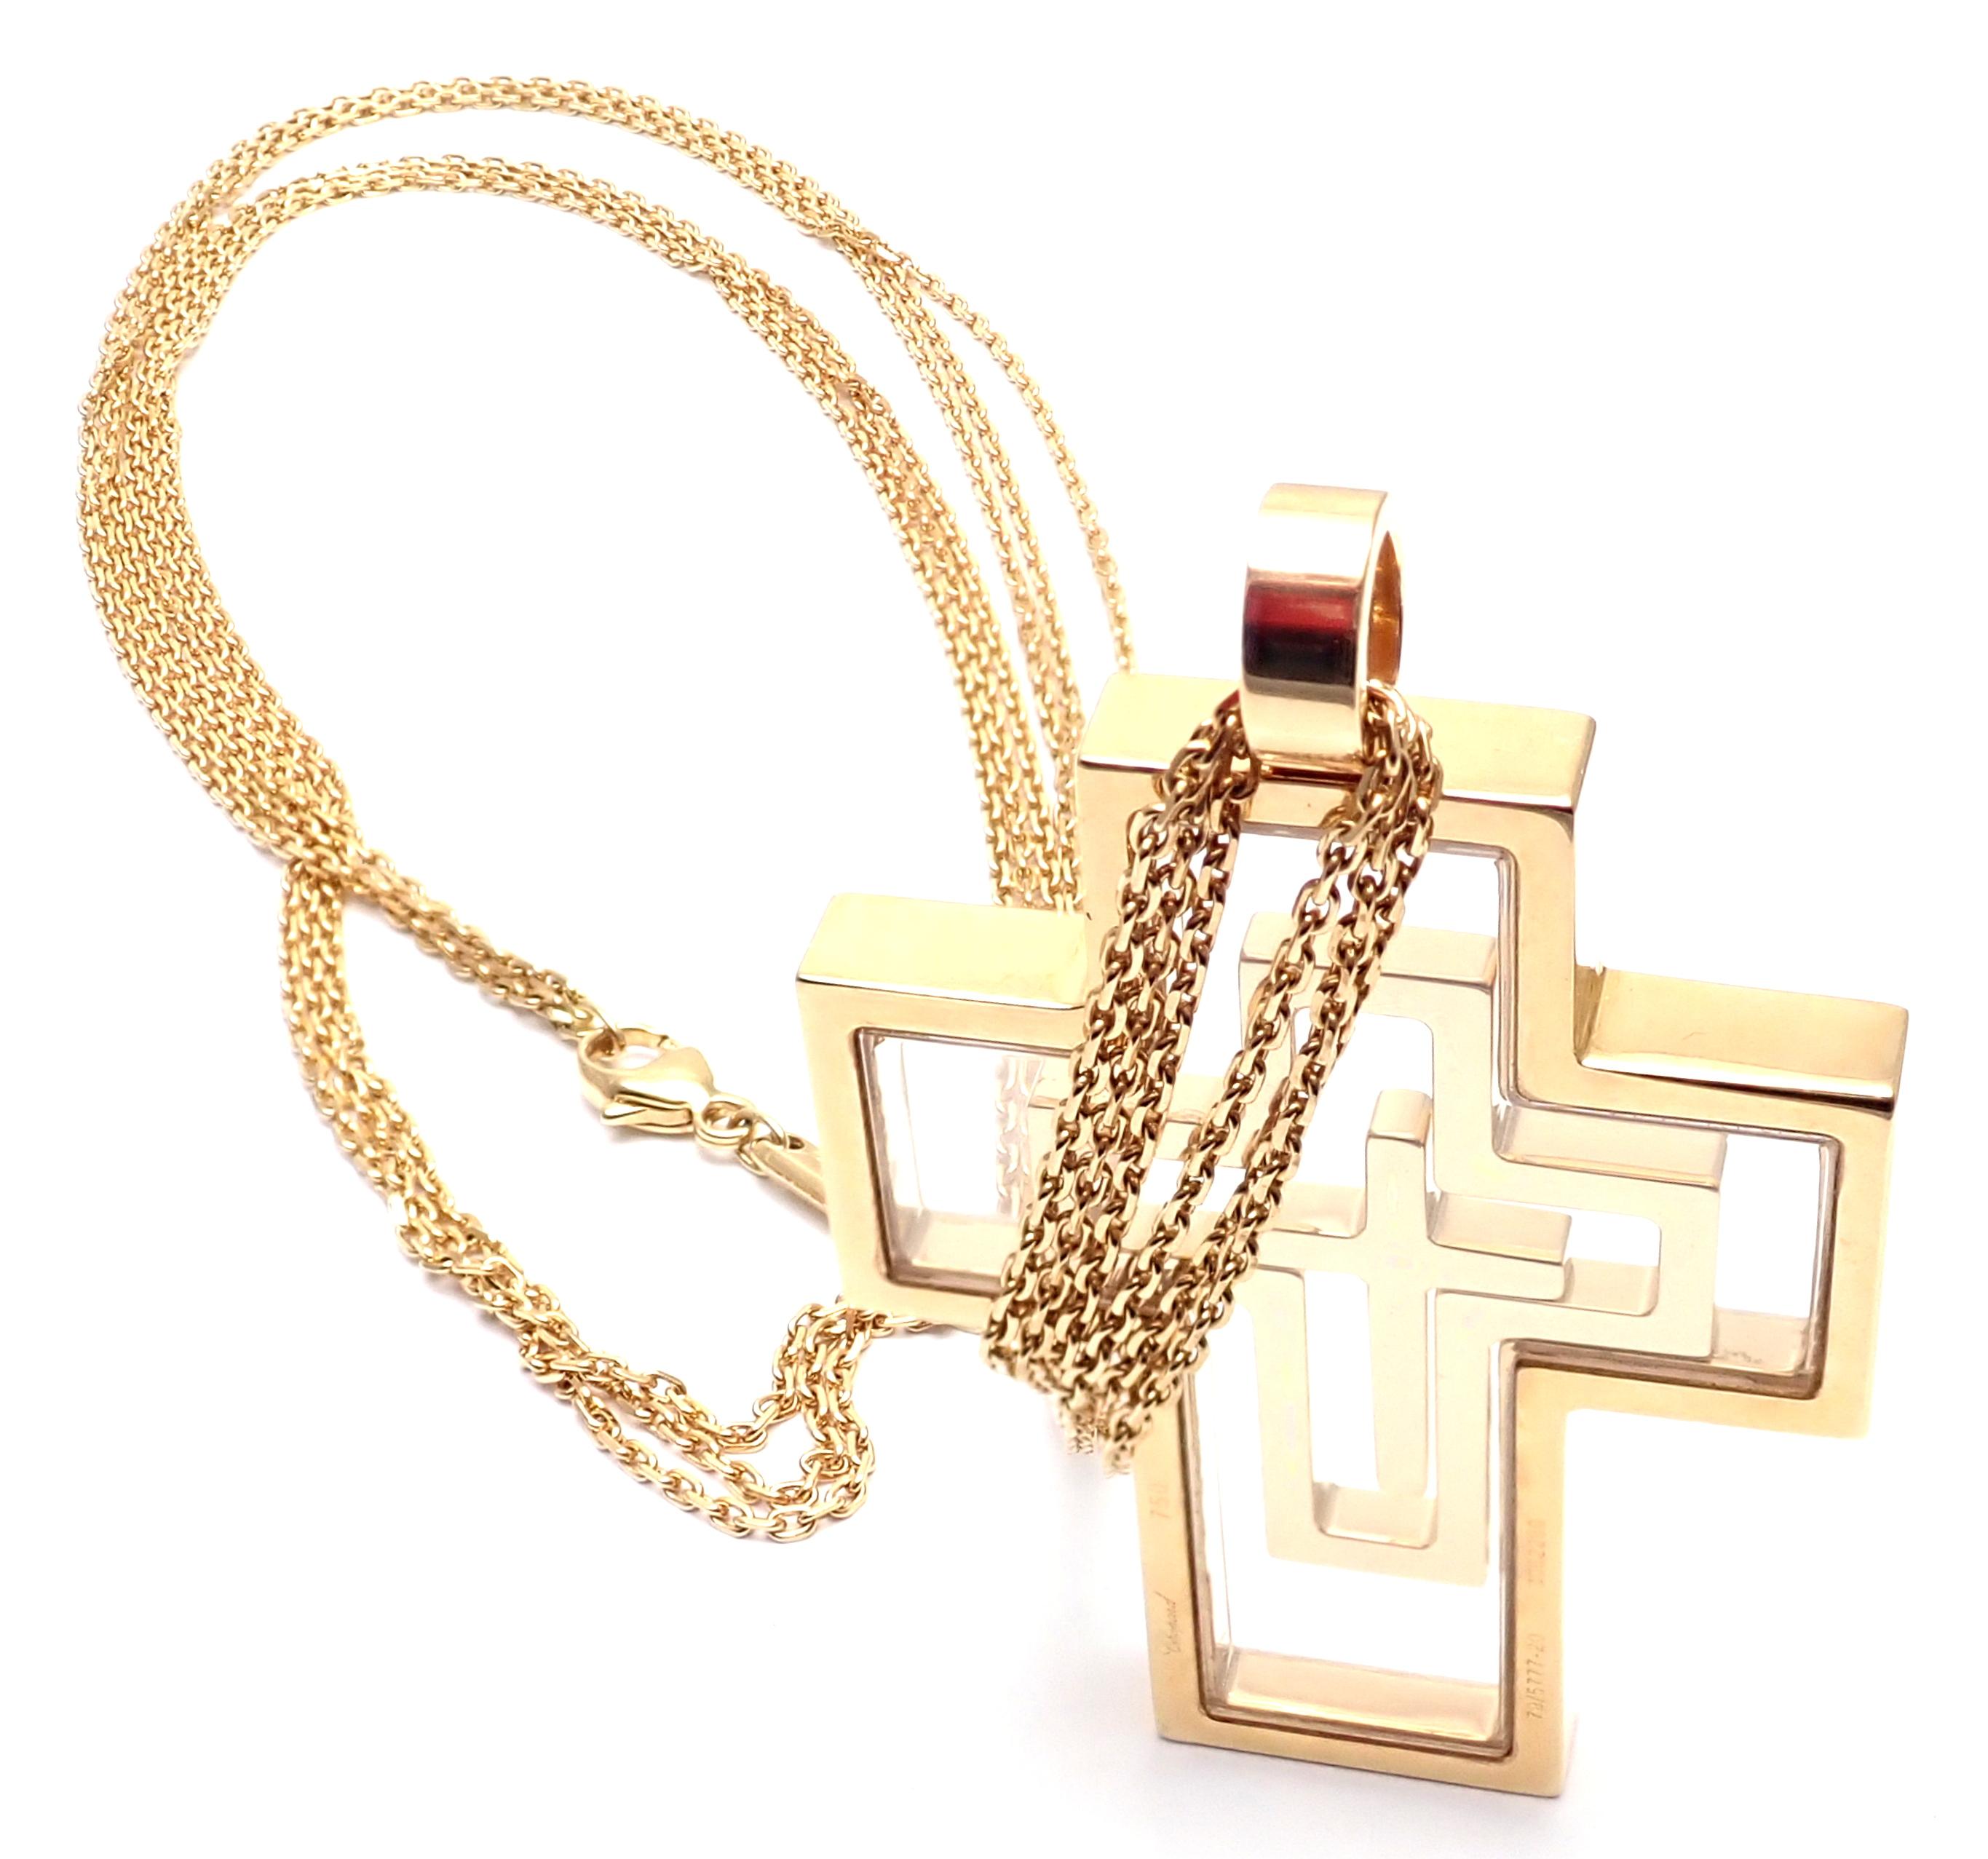 Women's or Men's Chopard Cross Extra Large Yellow Gold Pendant Necklace